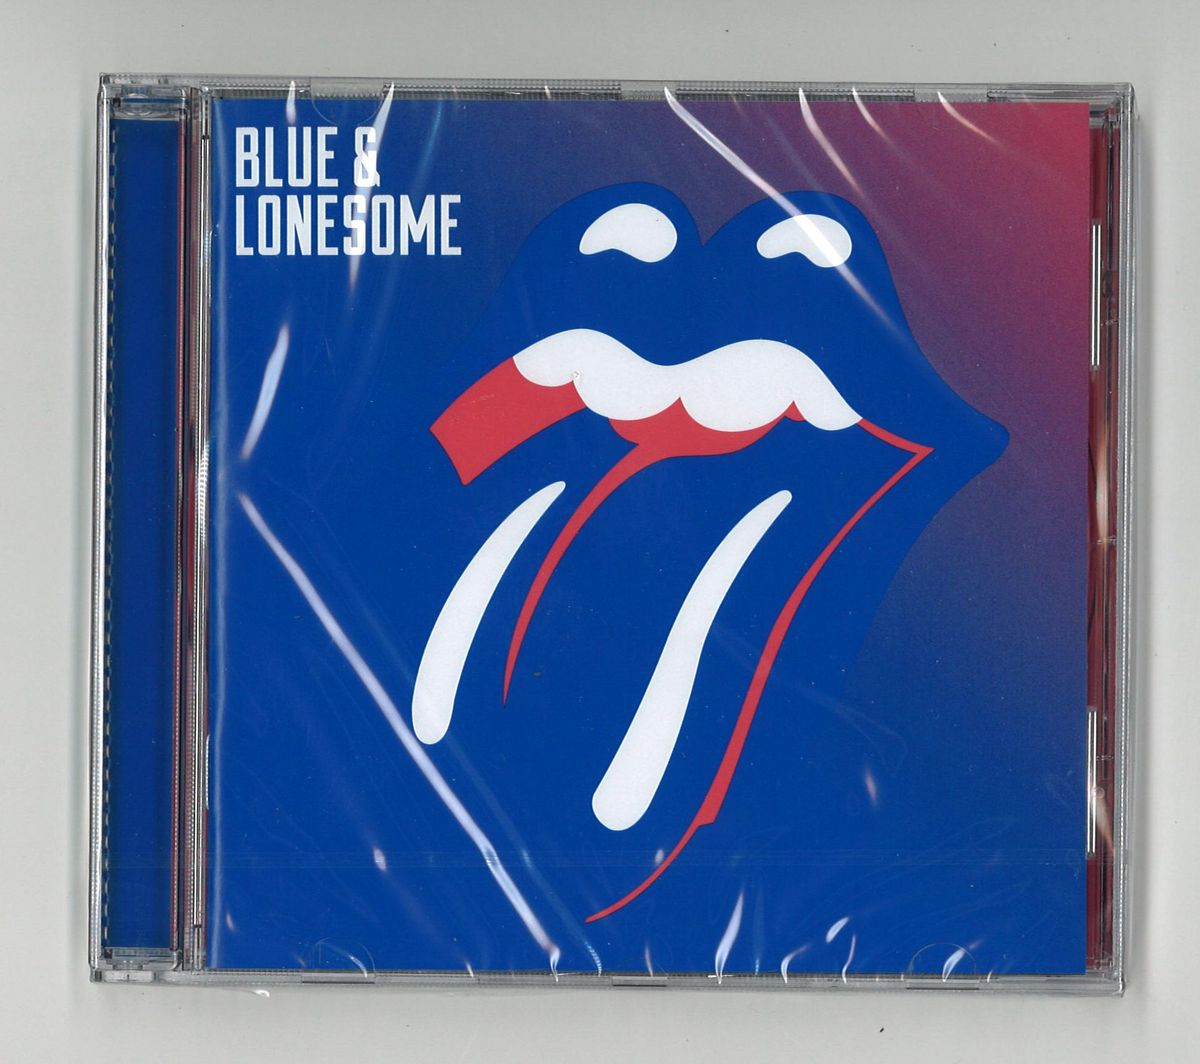 Rolling Stones - Blue & Lonesome Cd Album / Polydor Germany 5714942 -